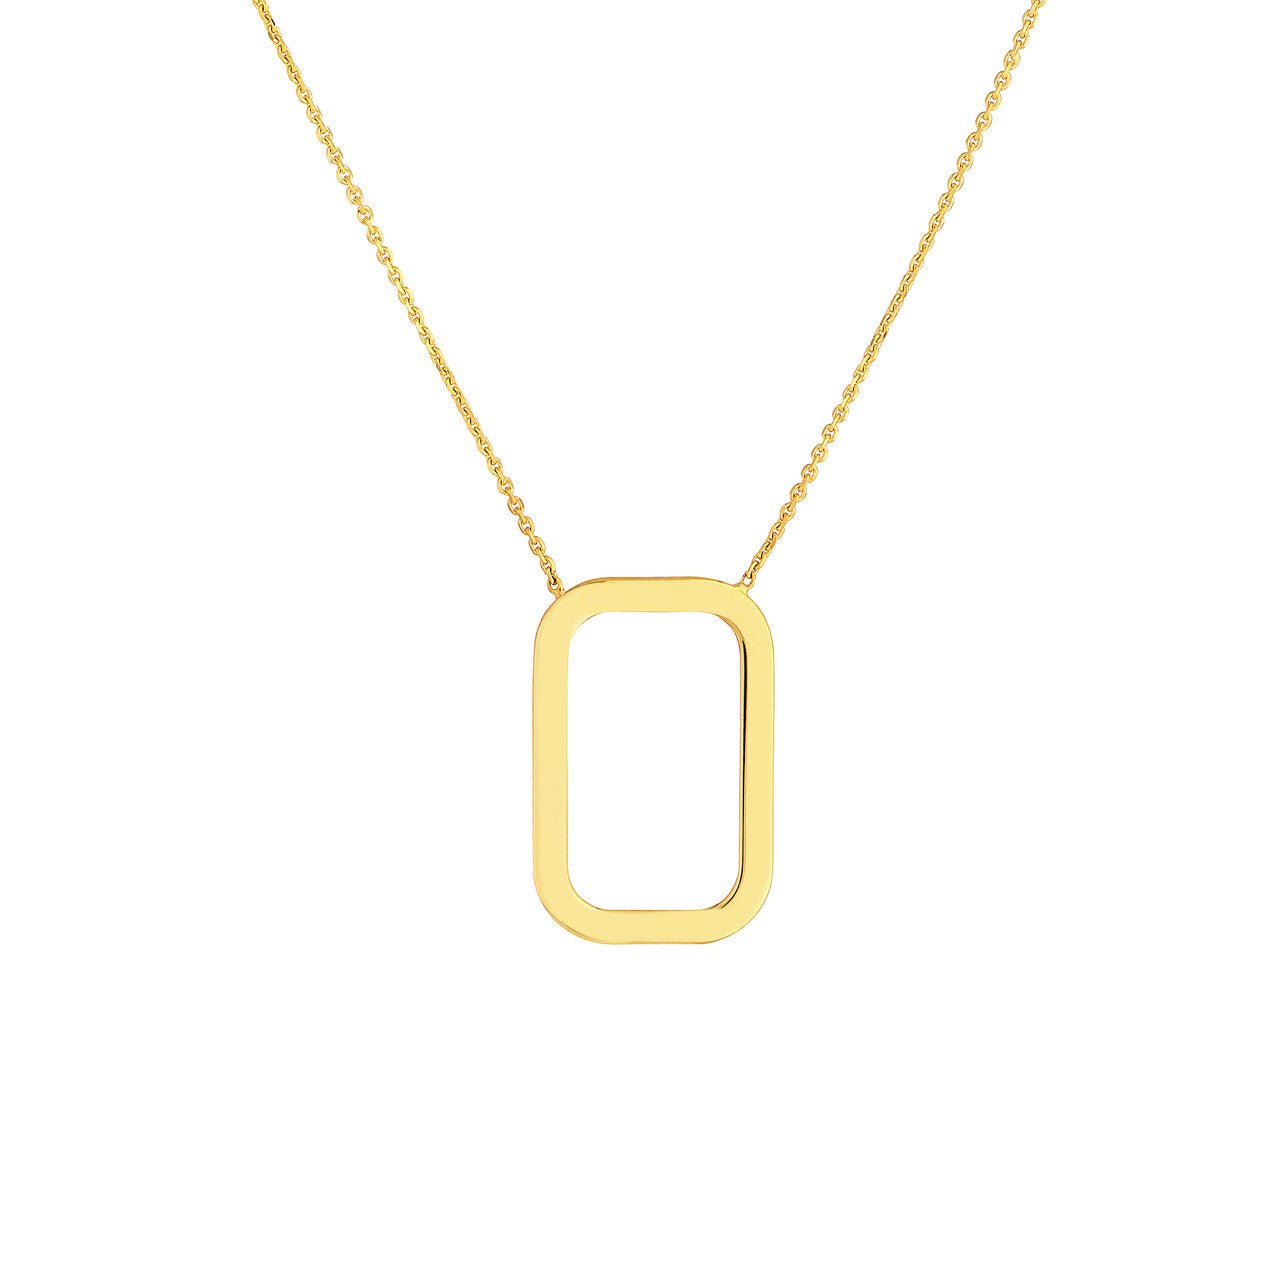 Buy Gold Rectangle Pendant Necklace, More Self Love Necklace, Rectangle Gold  Letter Pendant, Gold Letter Necklace, Gold Layered Necklace Online in India  - Etsy